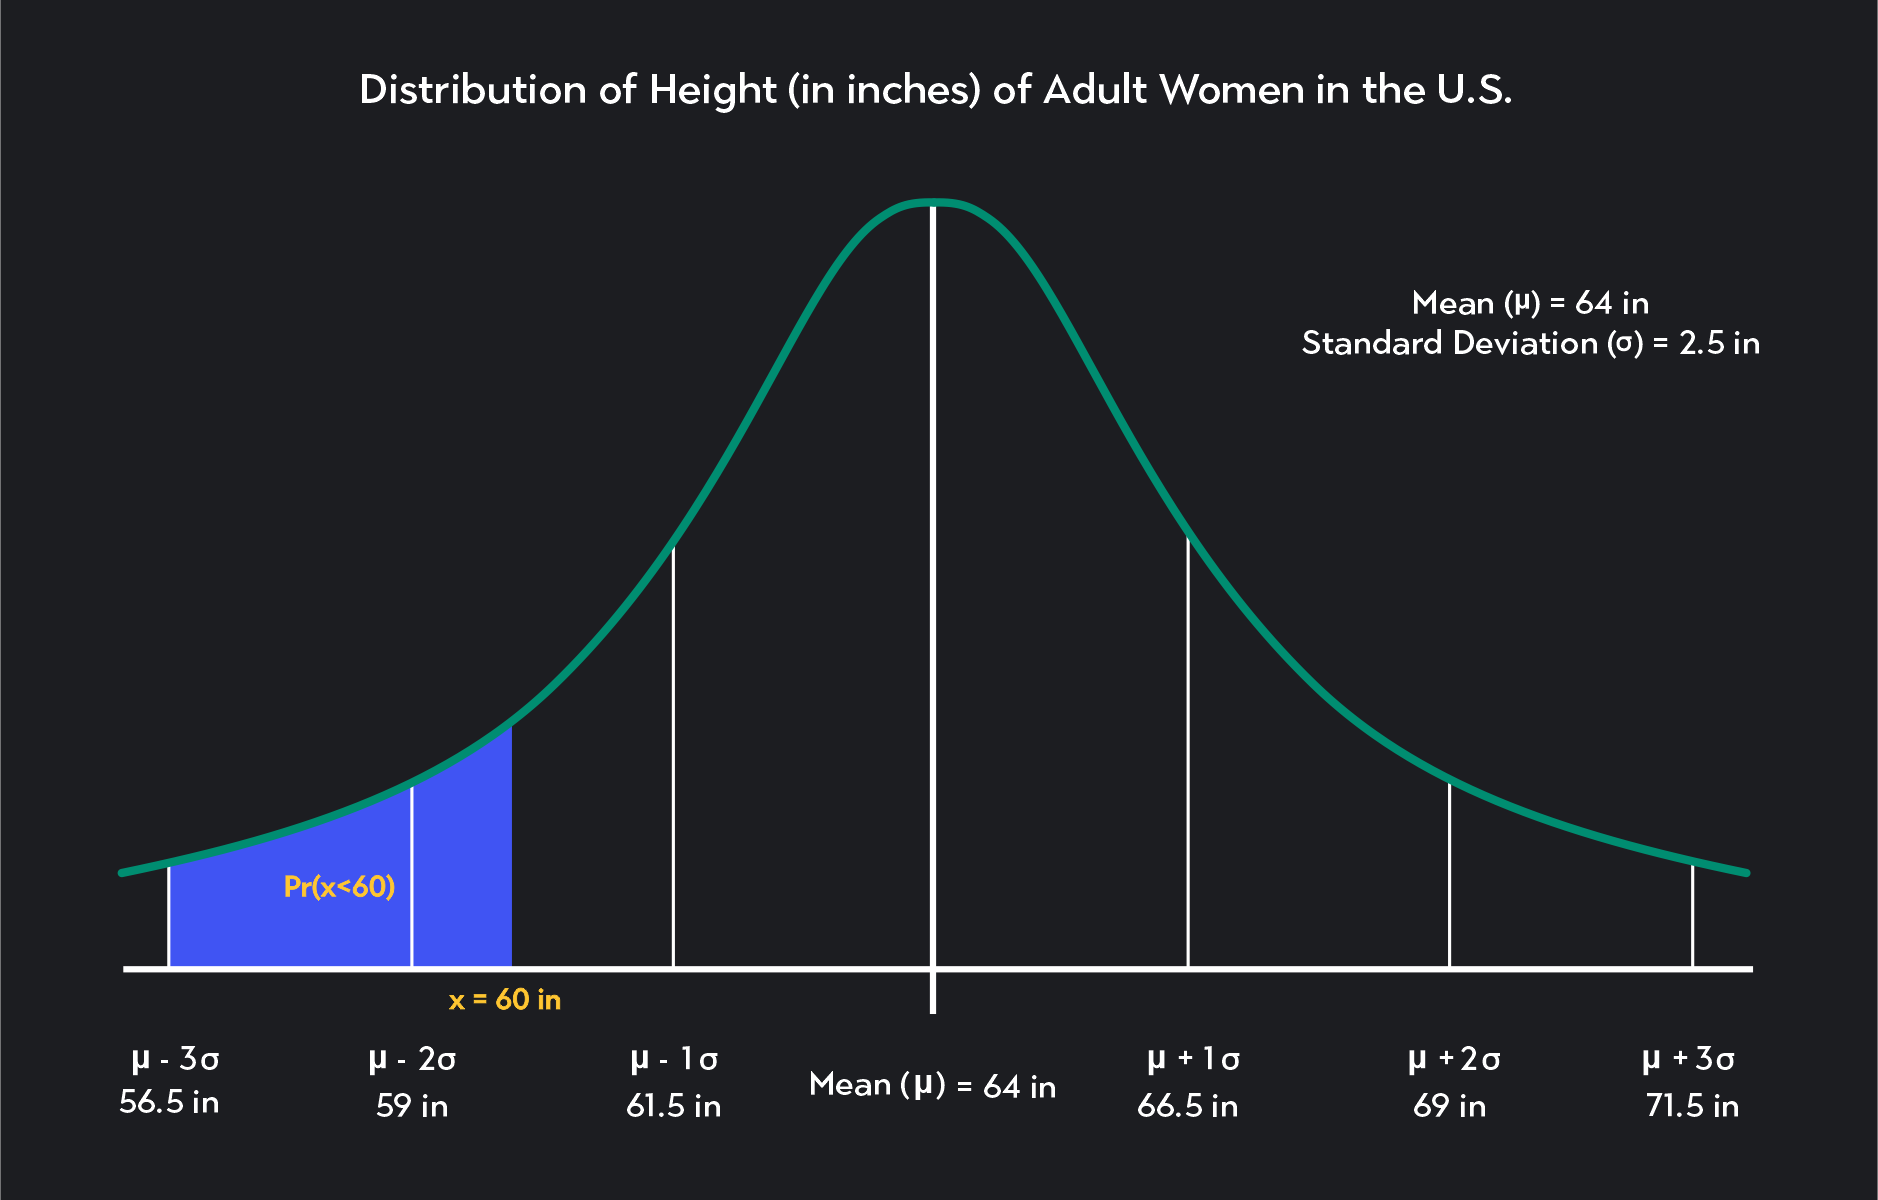 Normal Distribution graph showing the probability that an American woman will be less than 60 inches tall